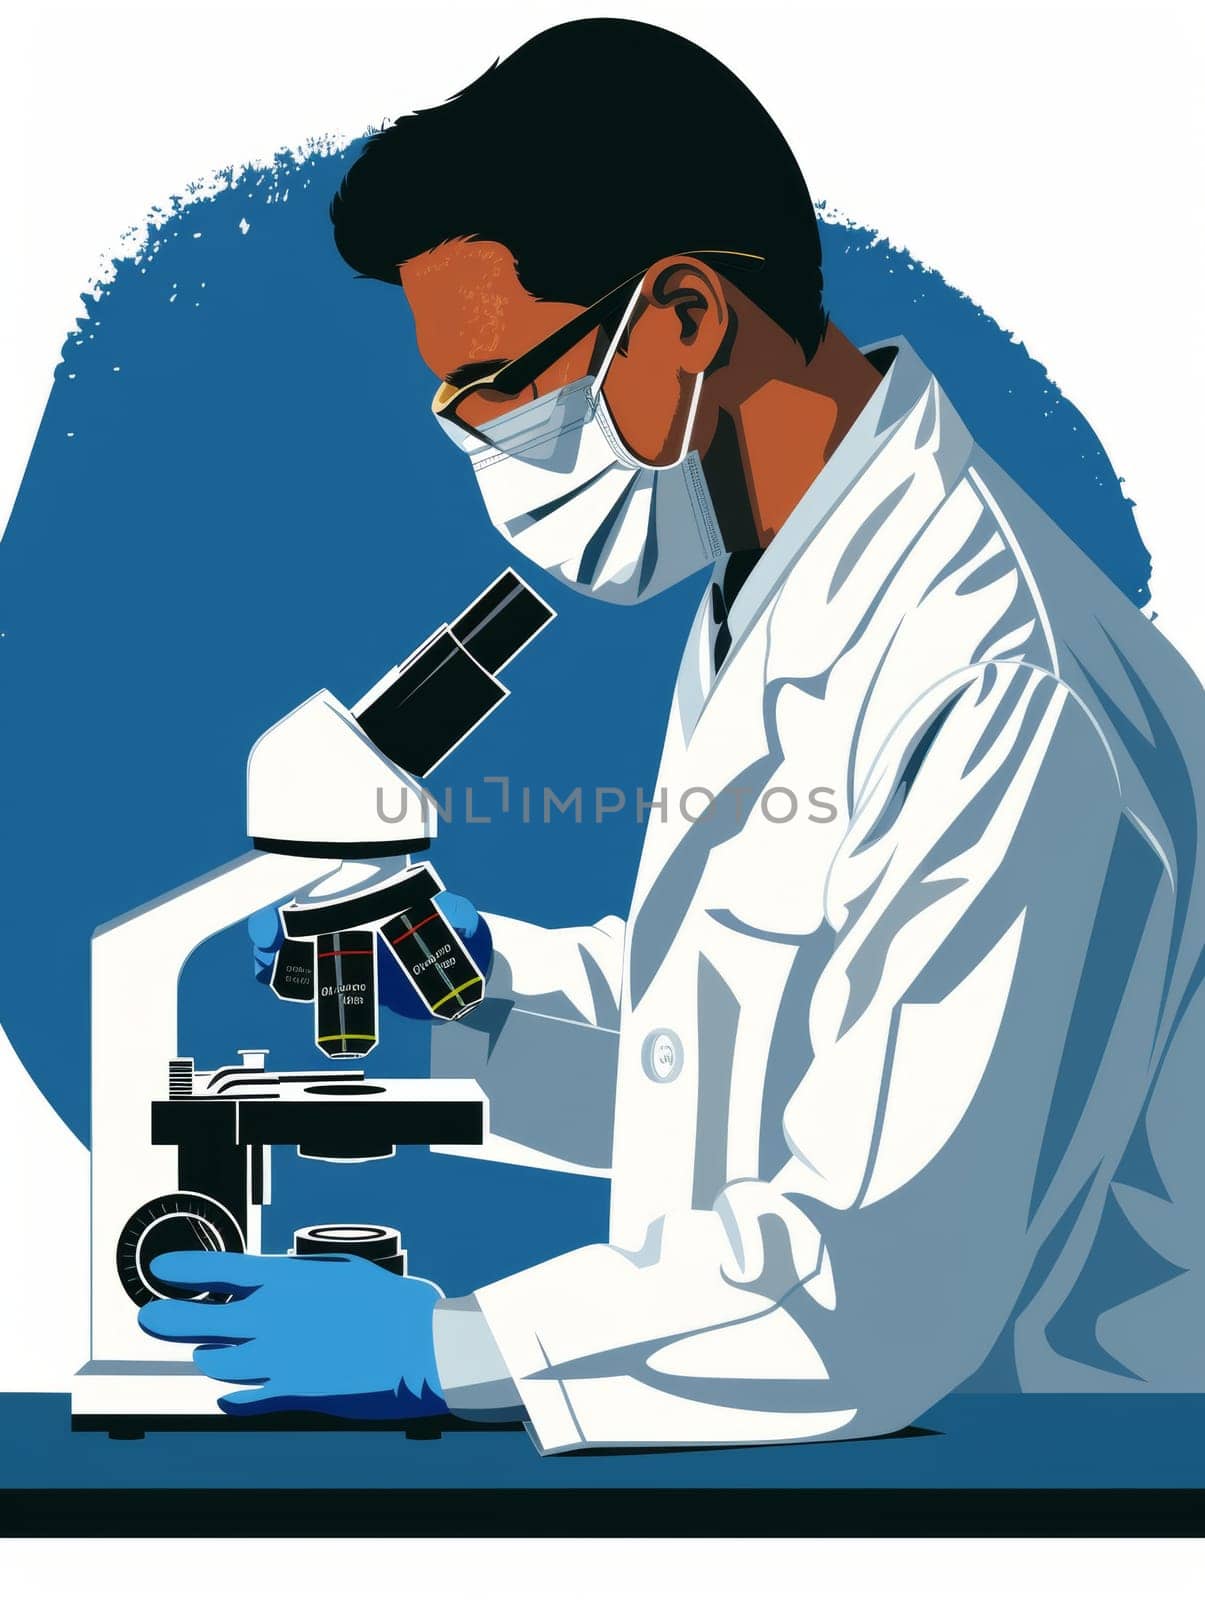 Stylized illustration of a scientist analyzing samples with a microscope